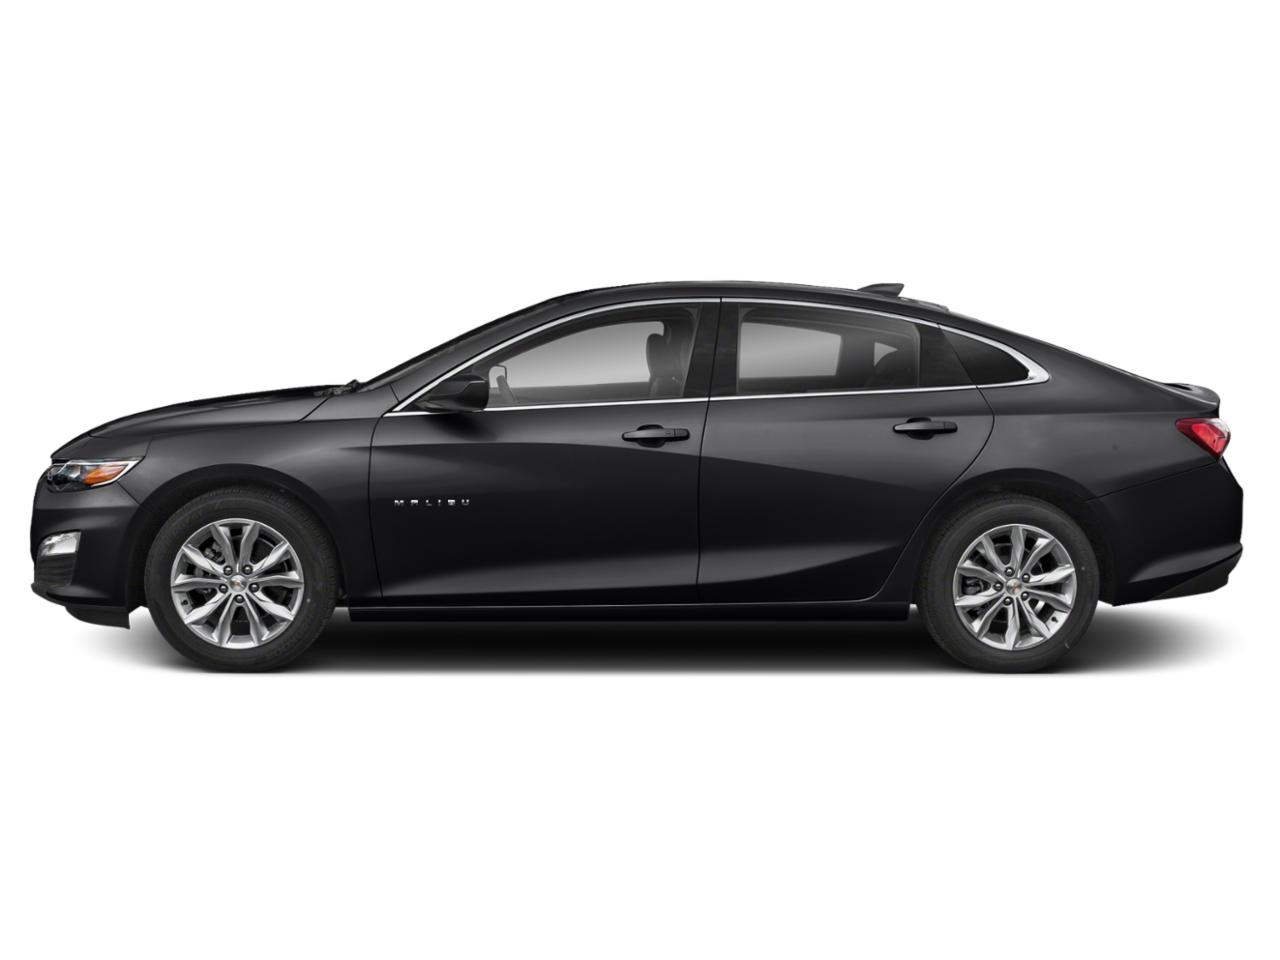 Used 2019 Chevrolet Malibu 1LT with VIN 1G1ZD5ST6KF170033 for sale in Pascagoula, MS